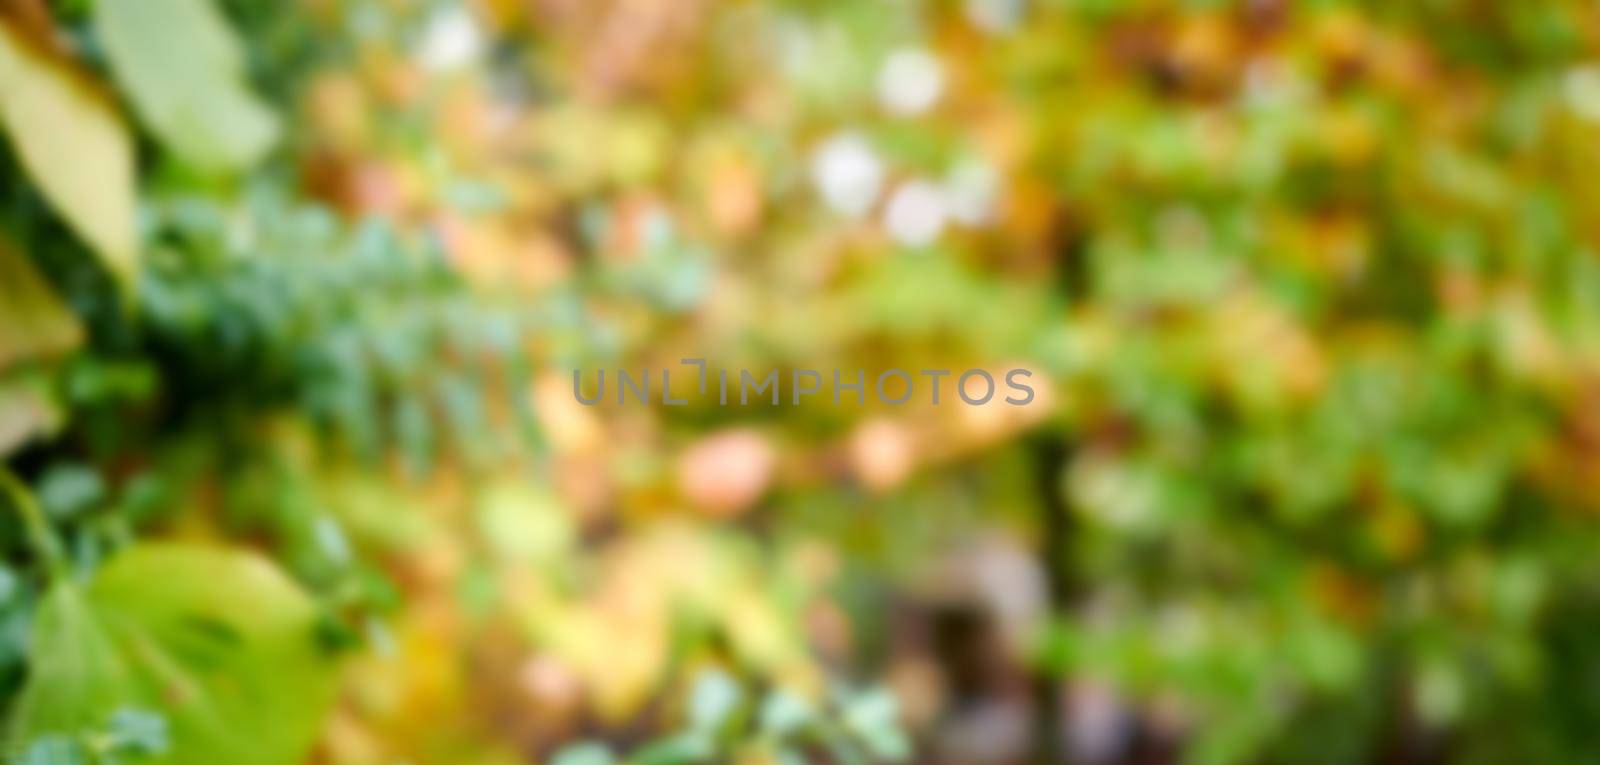 Beautiful, sunny and empty outside garden in the fall with colorful vibrant green and autumn brown leaves. Blurred outdoor nature background with abstract foliage of trees and plants. by YuriArcurs